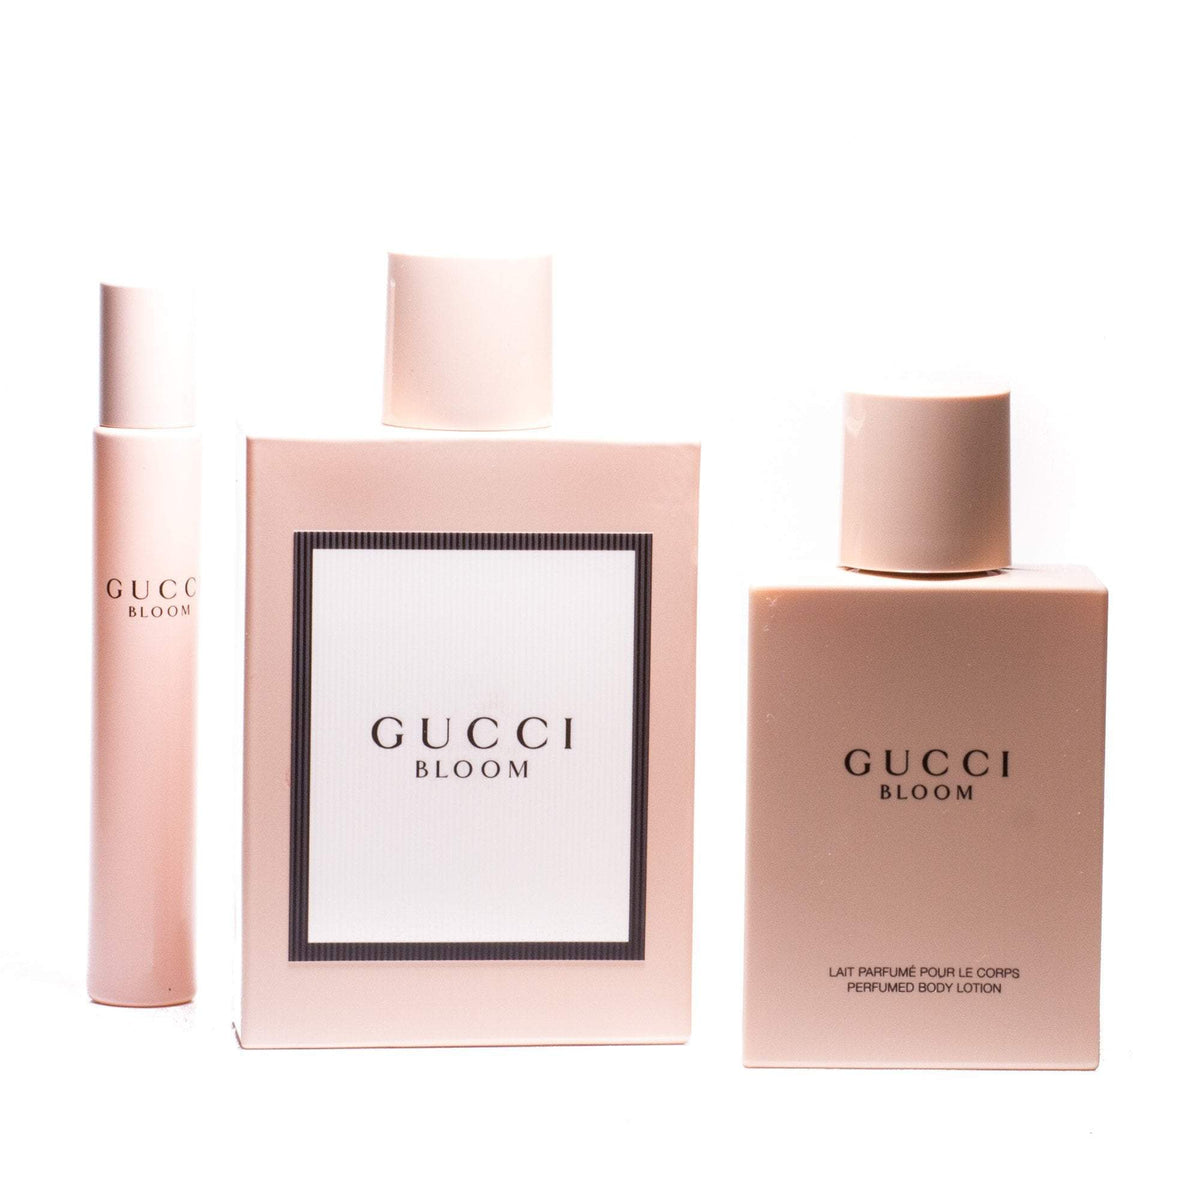 Gucci Bloom Gift Set for Women by Gucci 3.3 oz.